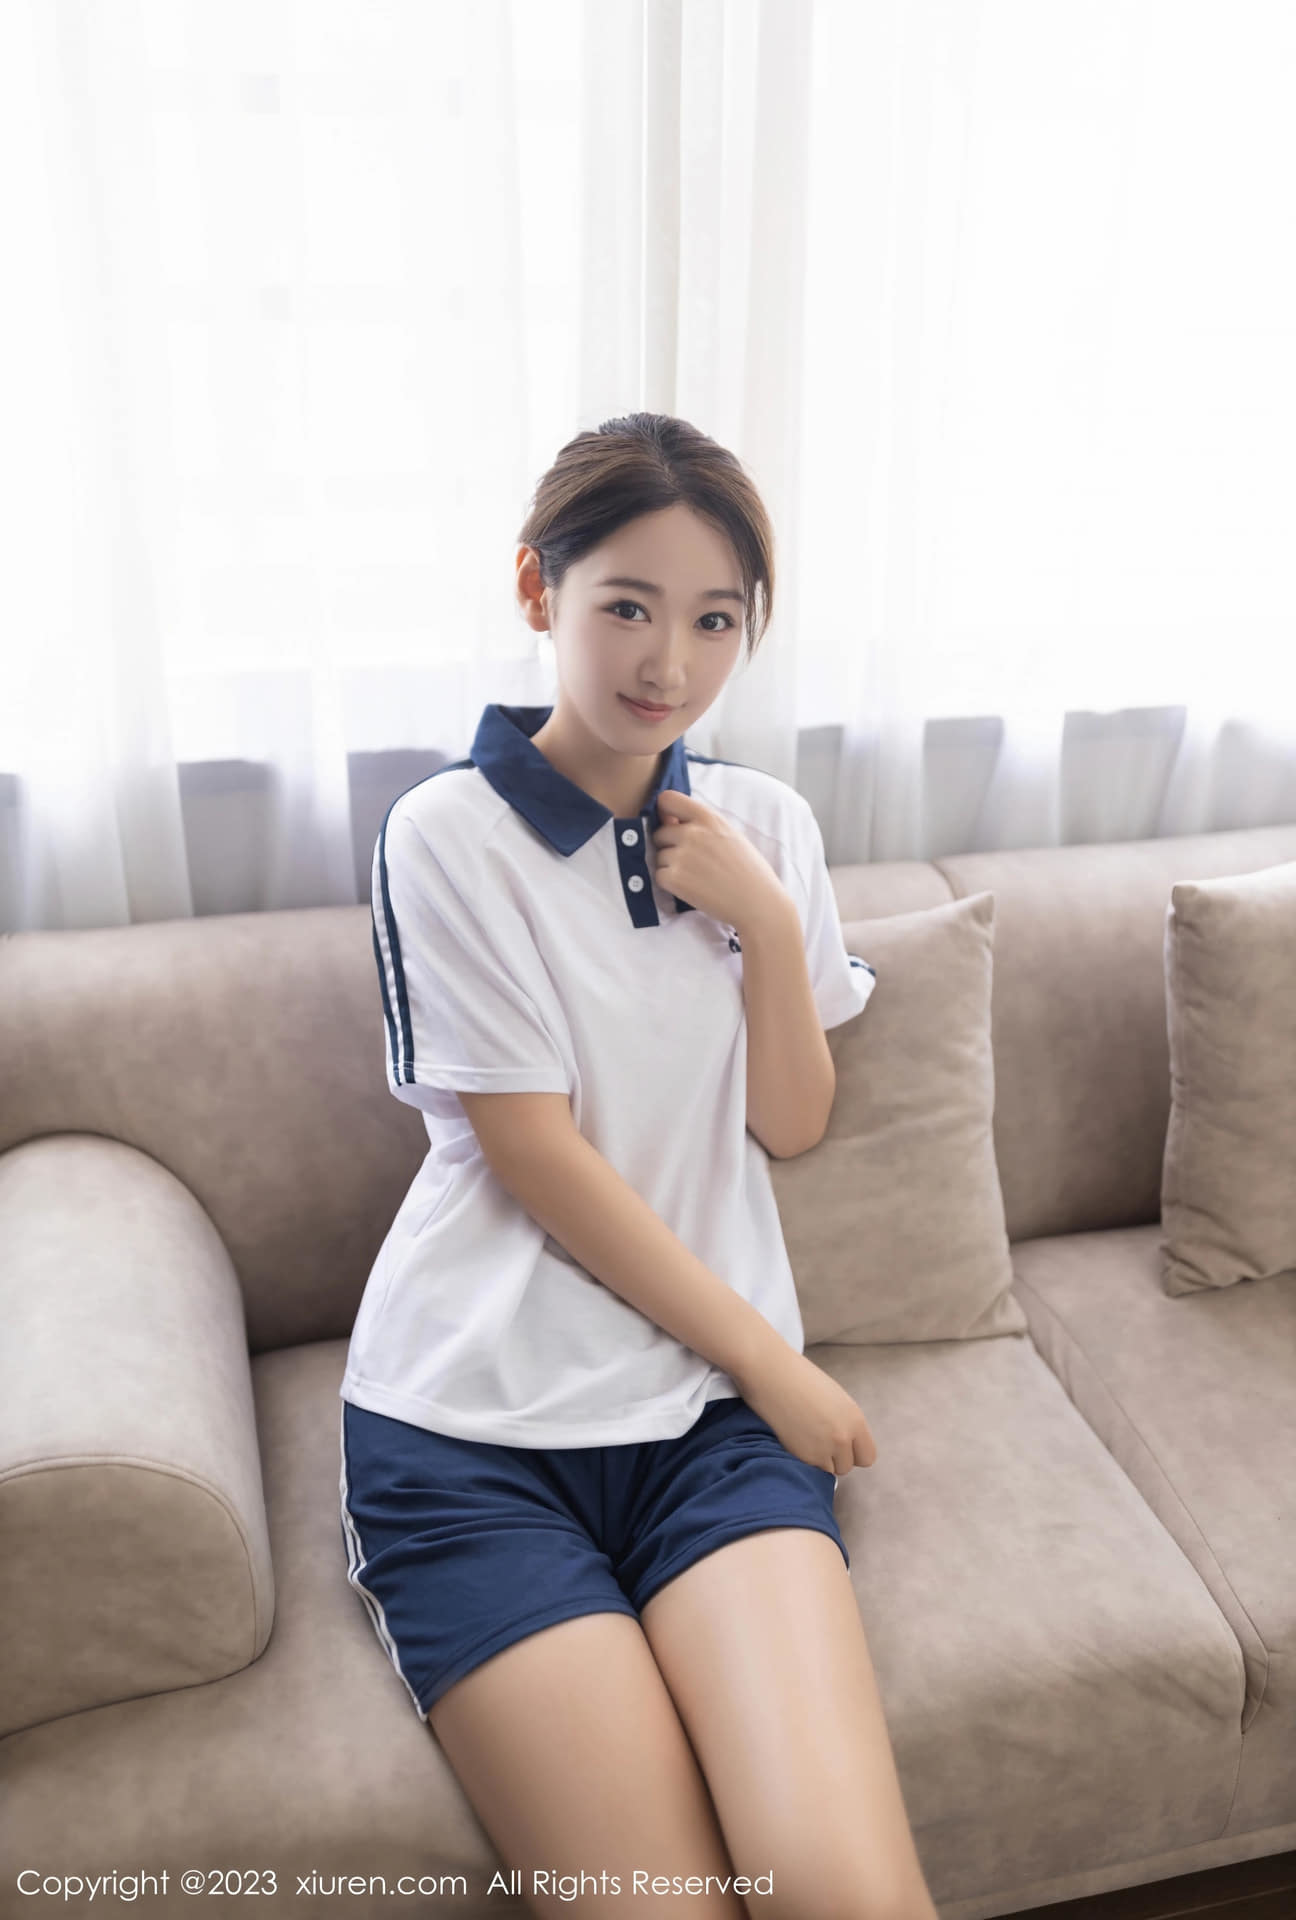 Showman "Tang Anqi"'s latest private shoot in August. Pure student outfit, rubbing breasts, vibrator to make water come out. Adult gift climax version